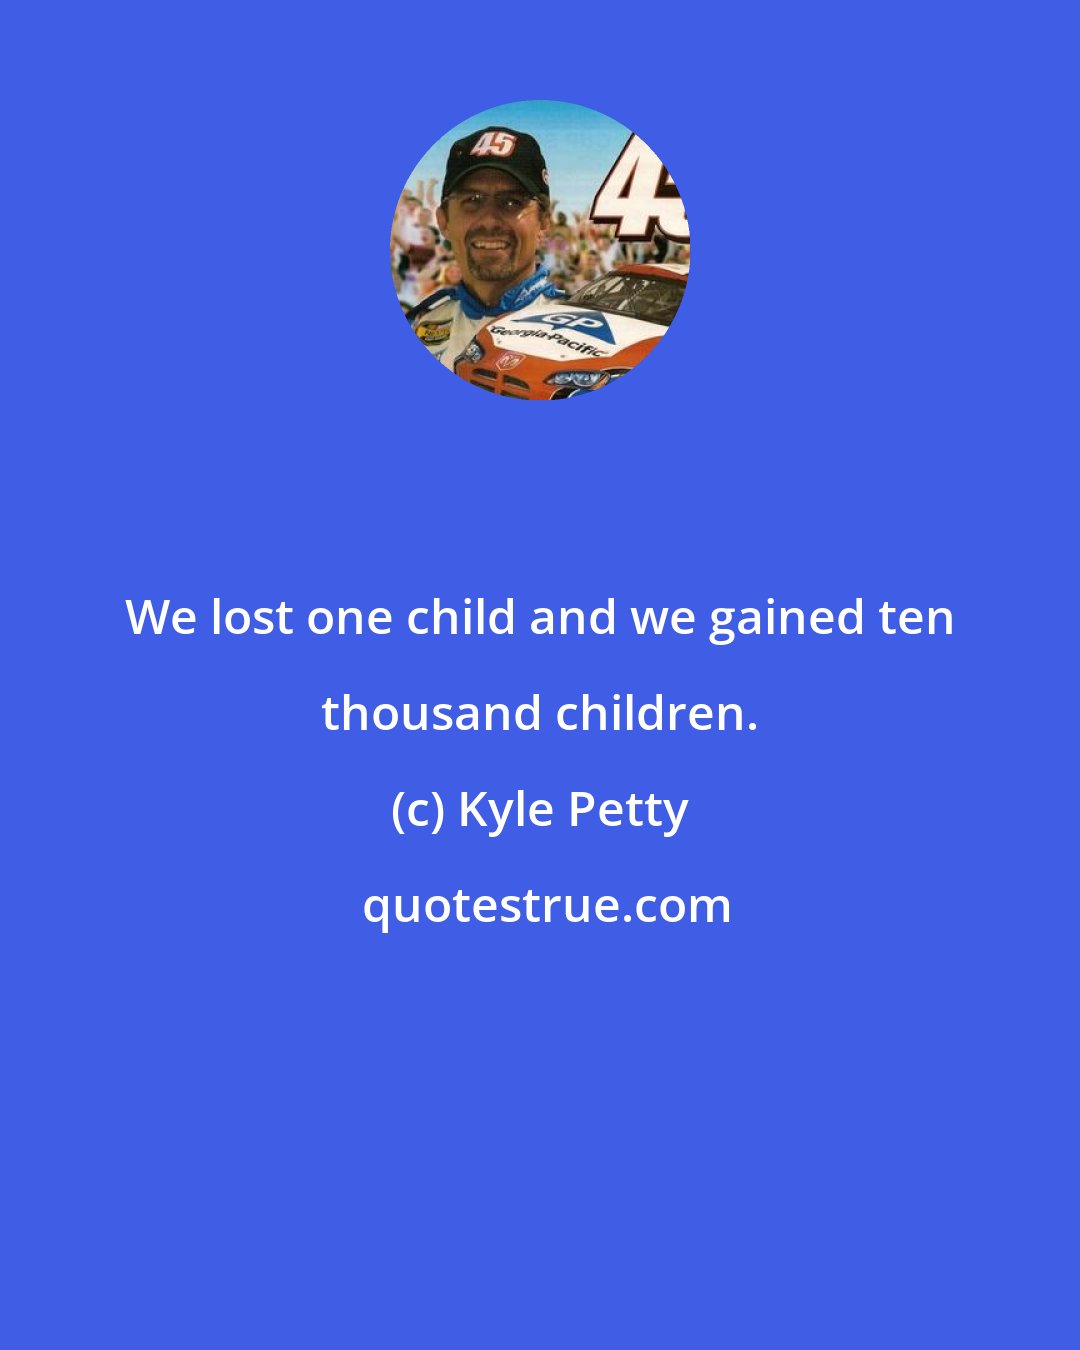 Kyle Petty: We lost one child and we gained ten thousand children.